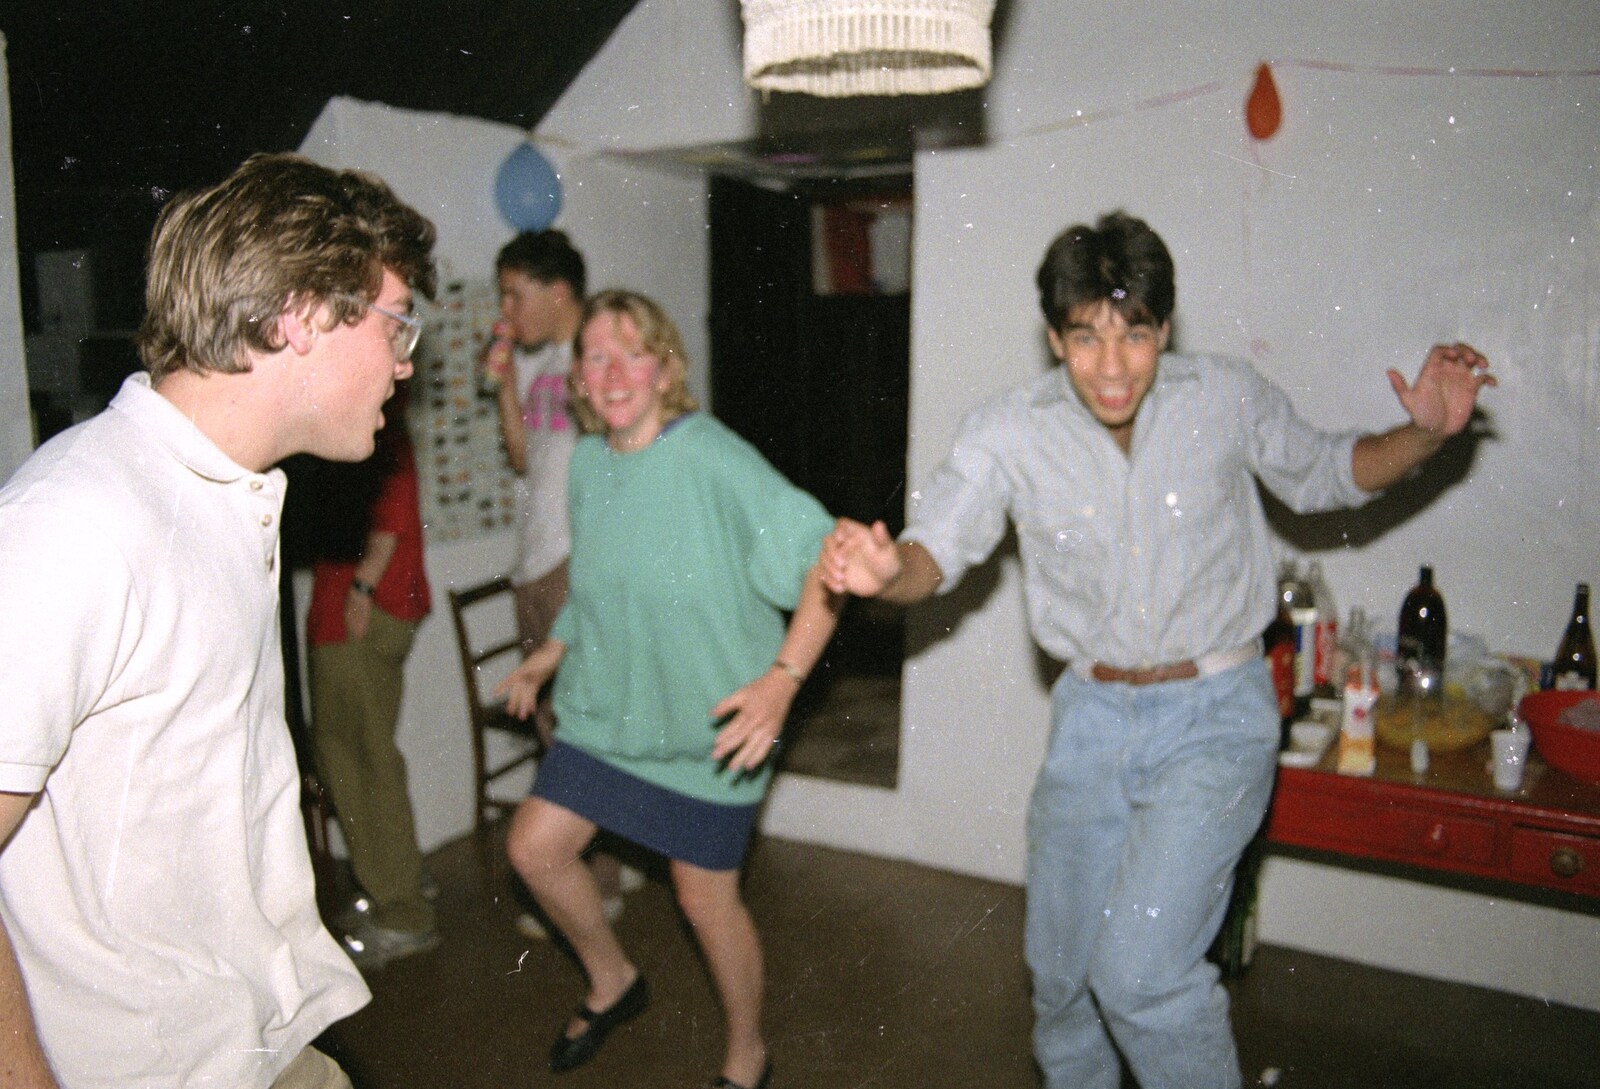 Liz's Party, Abergavenny, Monmouthshire, Wales - 4th August 1990: Funky dancing